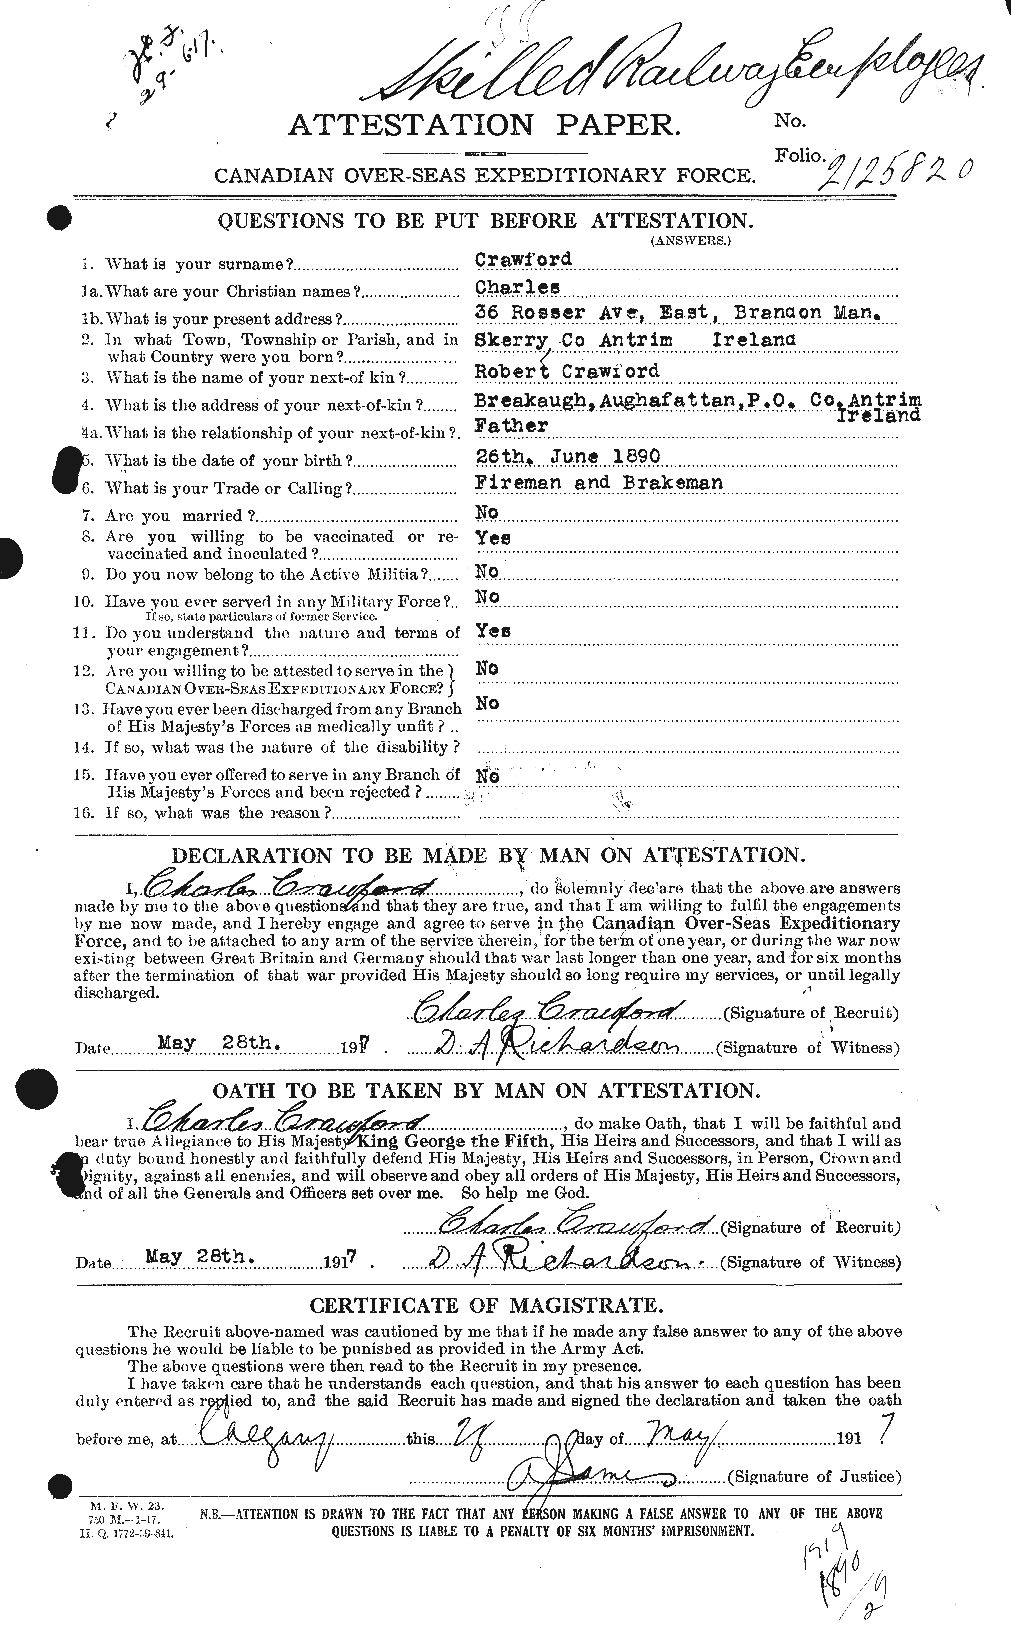 Personnel Records of the First World War - CEF 060853a